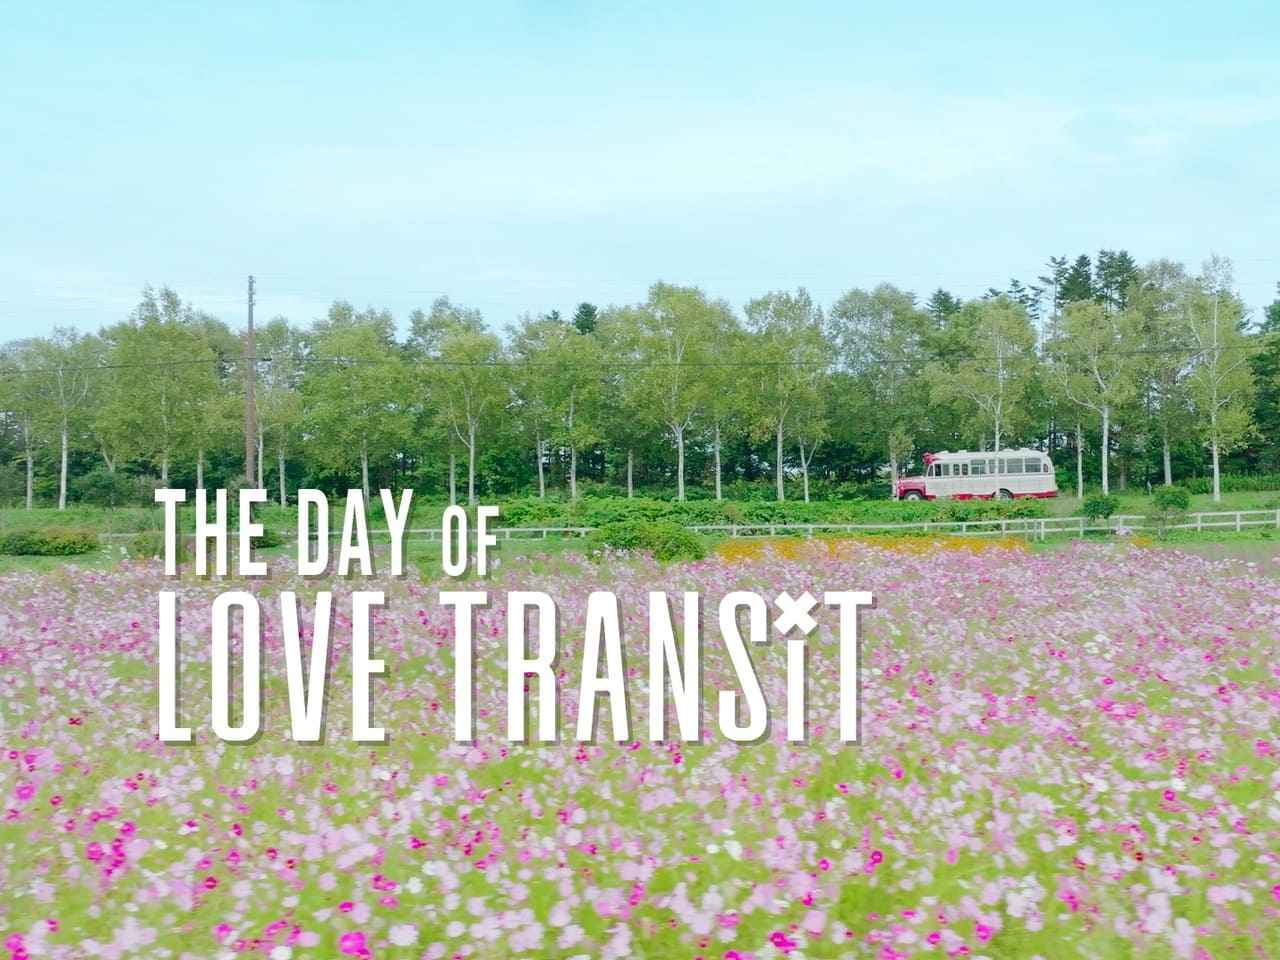 THE DAY OF LOVE TRANSiT